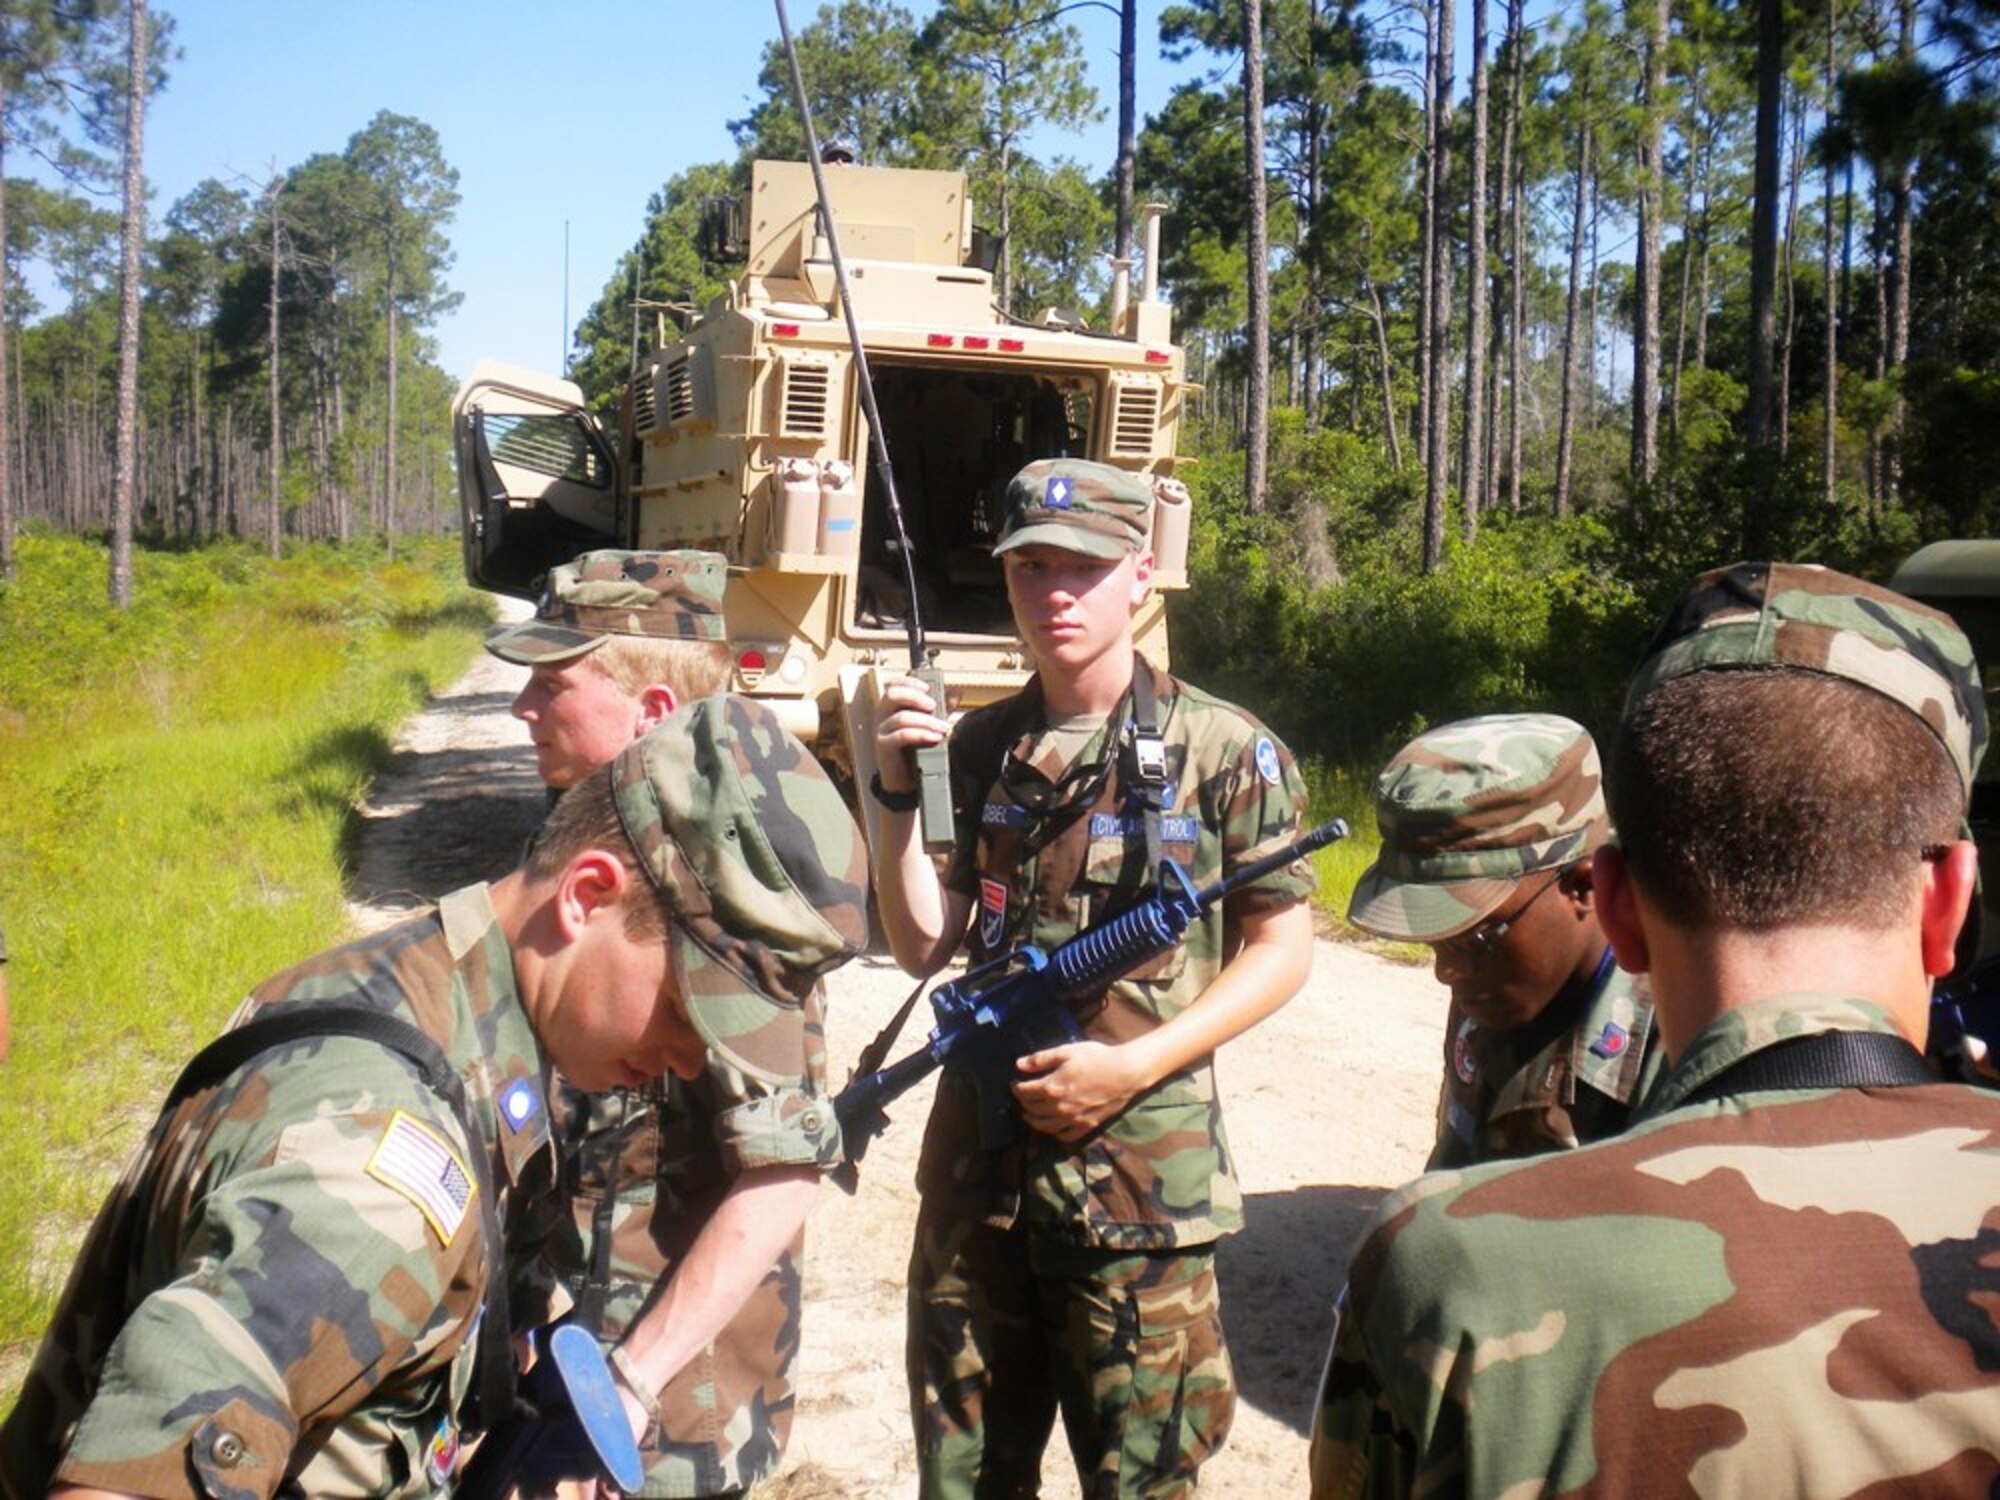 Cadet Maj. Kyle Zobel (center) of North Carolina's Raleigh Wake Composite Squadron uses the radio to coordinate his unit's response during a convoy training exercise at the Civil Air Patrol's Air Force Civil Engineering Academy at Tyndall.(Courtesy photo)
